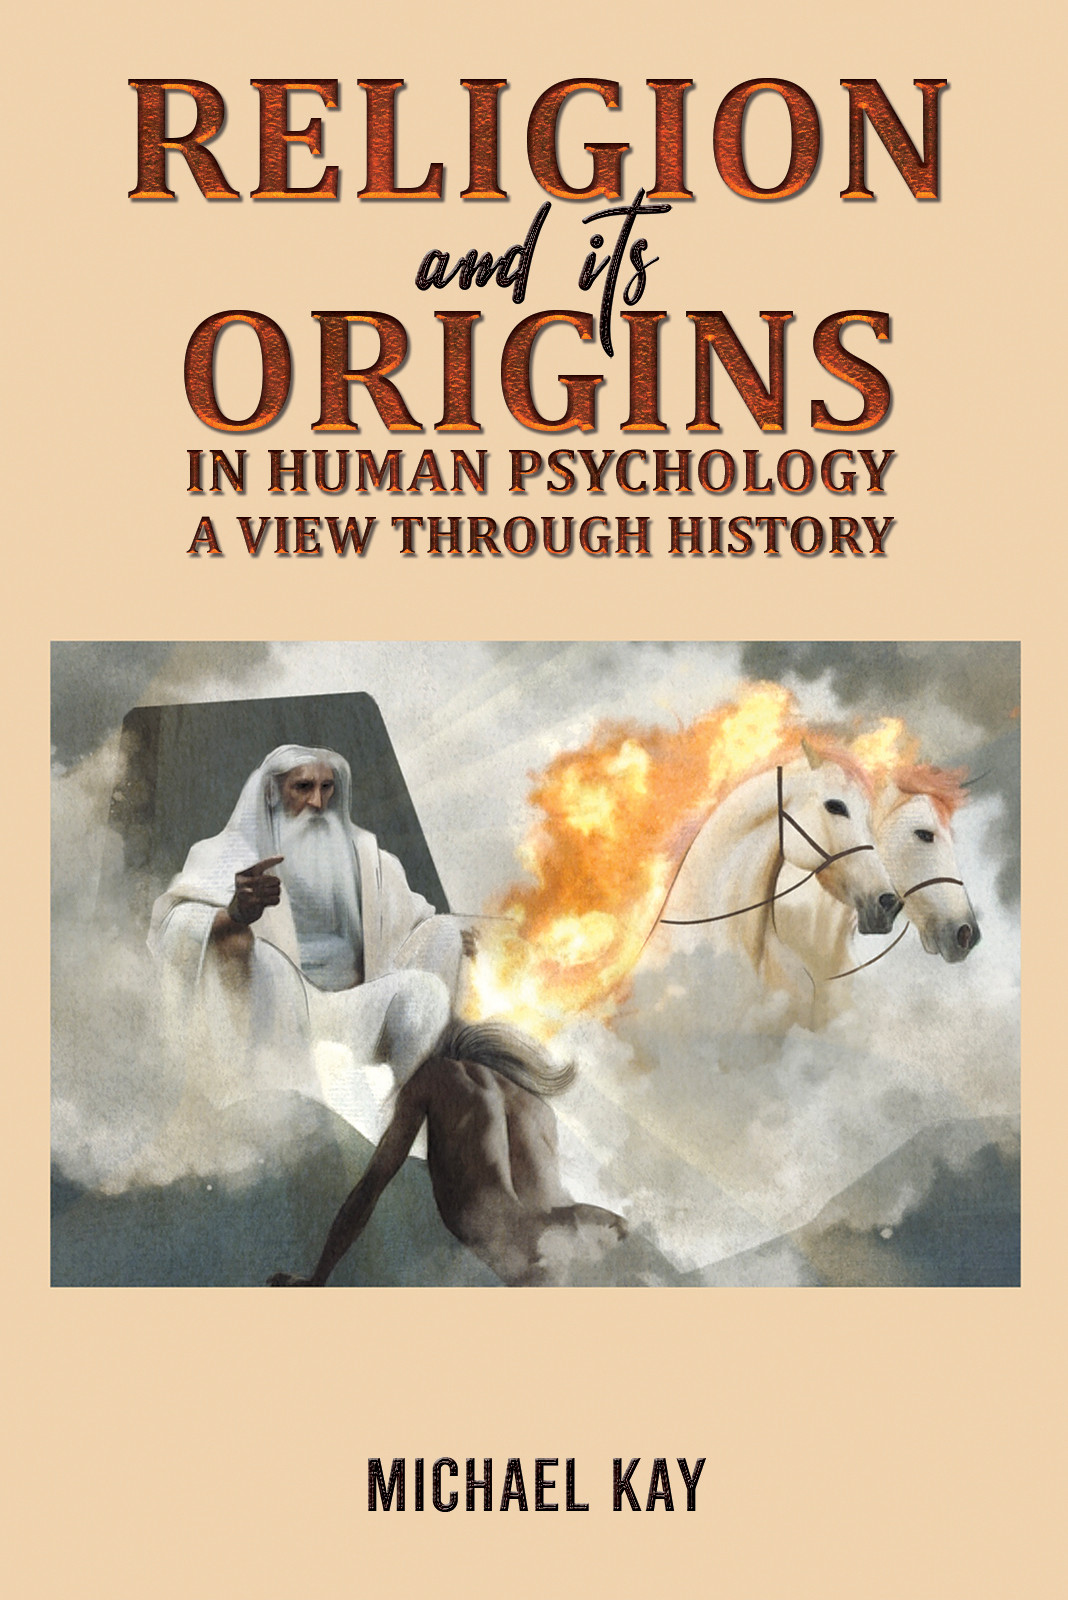 Religion and its Origins in Human Psychology: A View through History